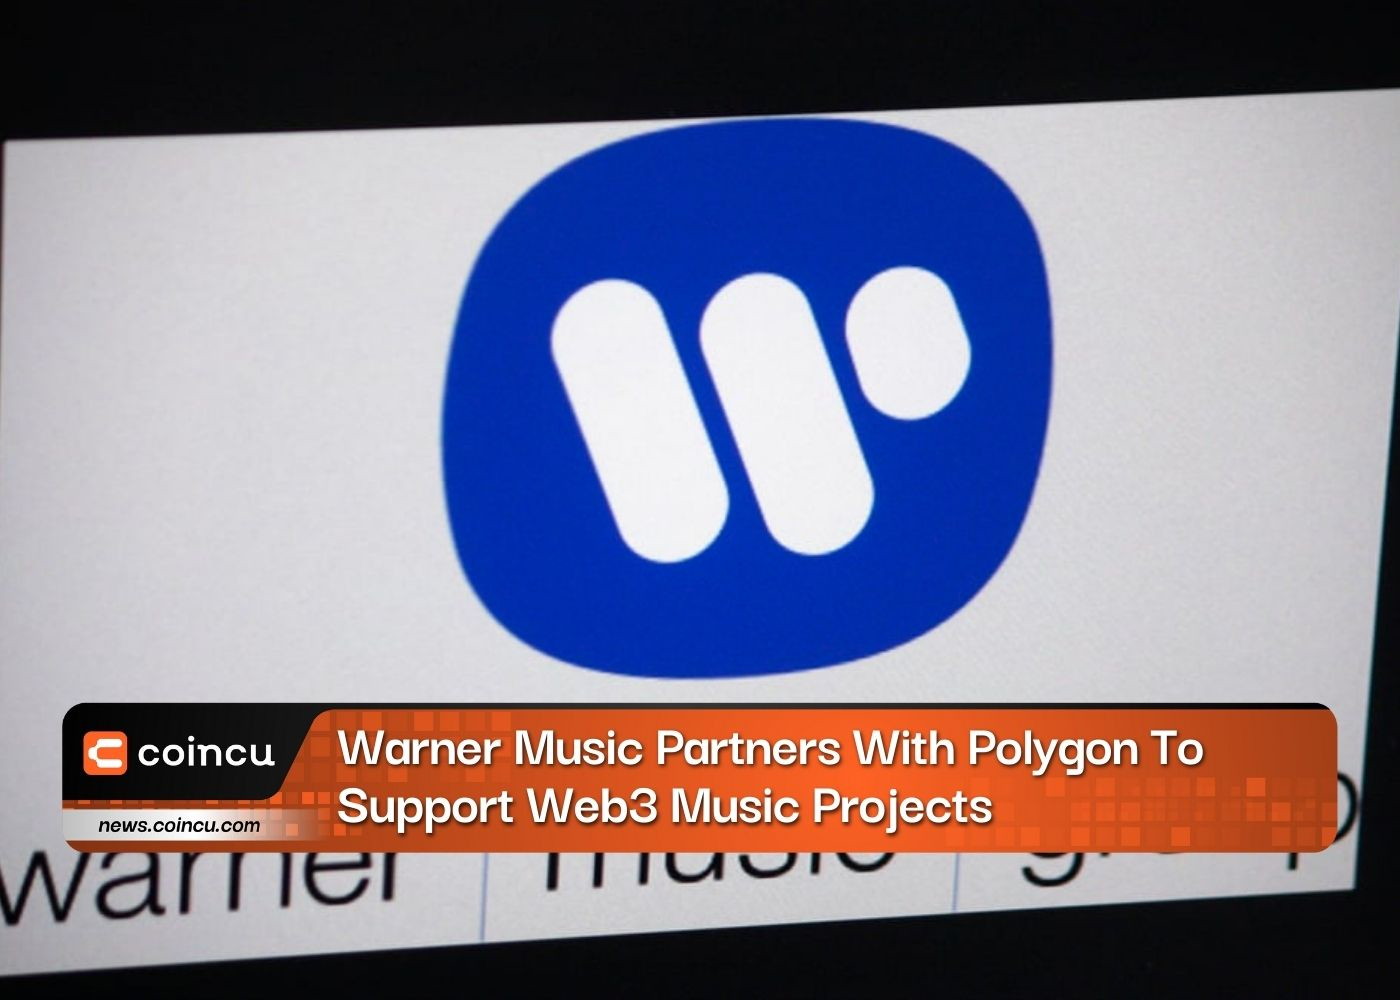 Warner Music Partners With Polygon To Support Web3 Music Projects